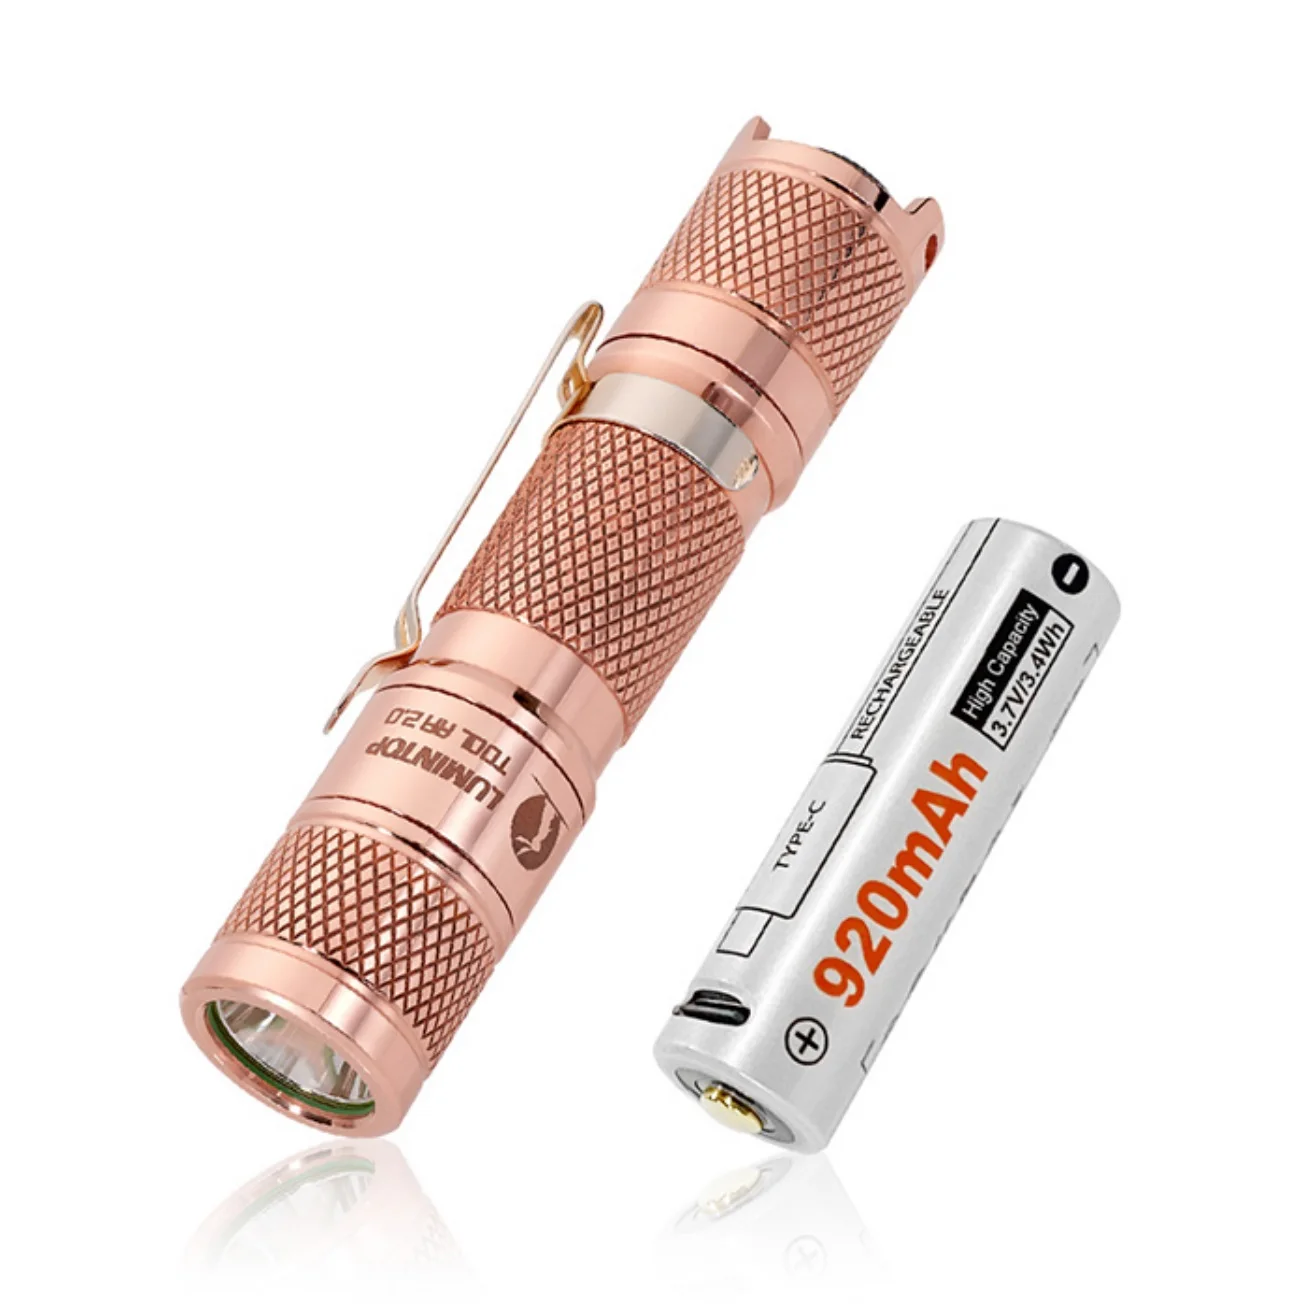 

LUMINTOP TOOL AA 2.0 COPPER MINI Flashlight CREE XP-L HD 650 Lumen Pocket EDC Torch Keychain Light by 14500 Battery for Camping